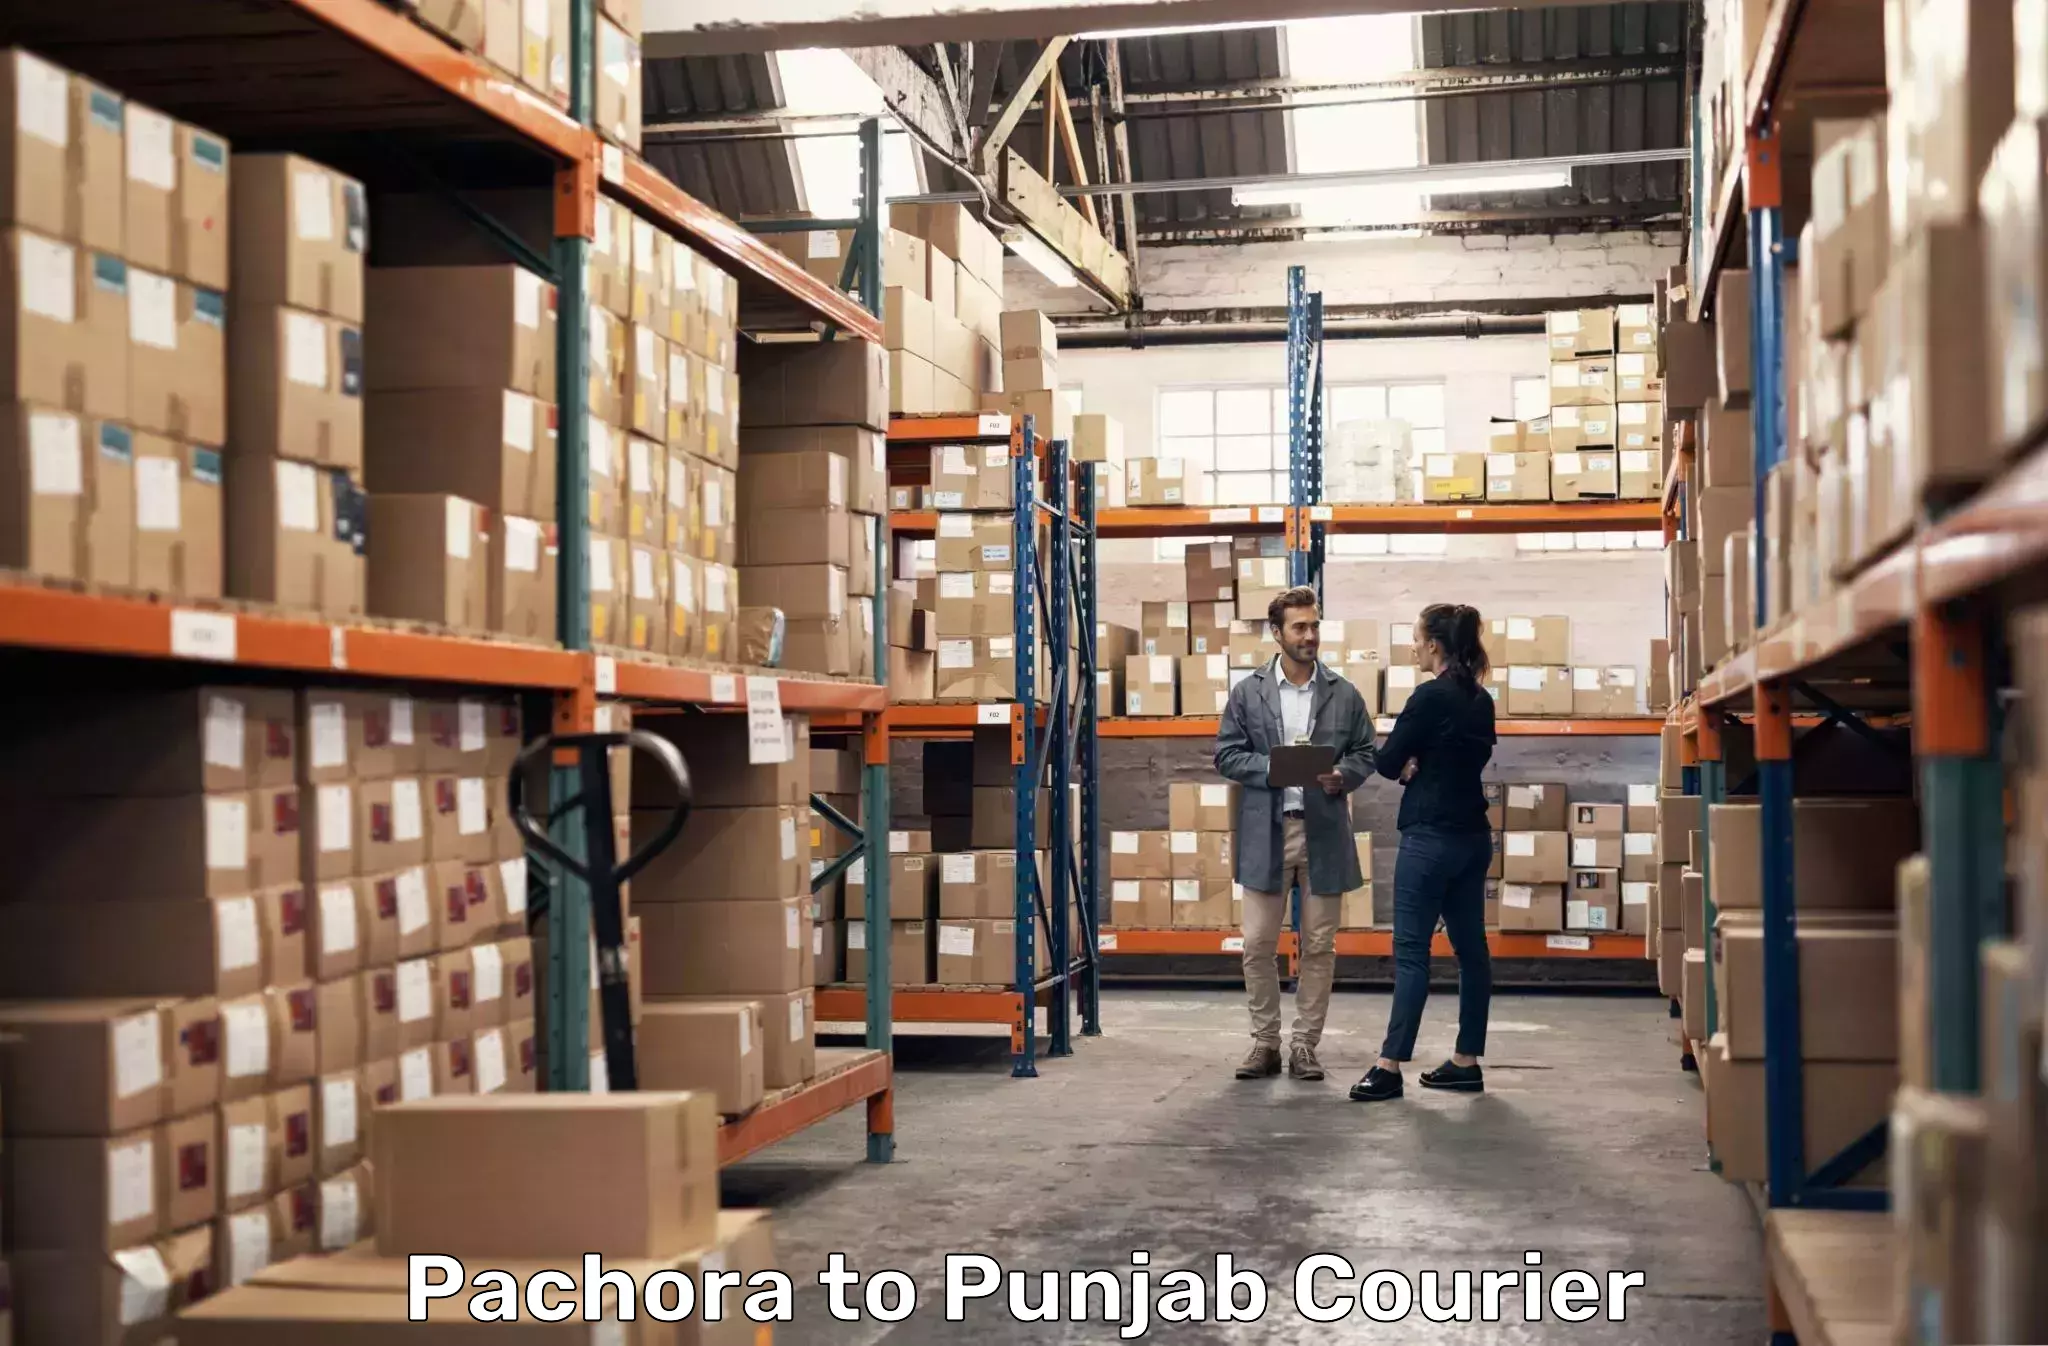 Express delivery capabilities Pachora to Khanna